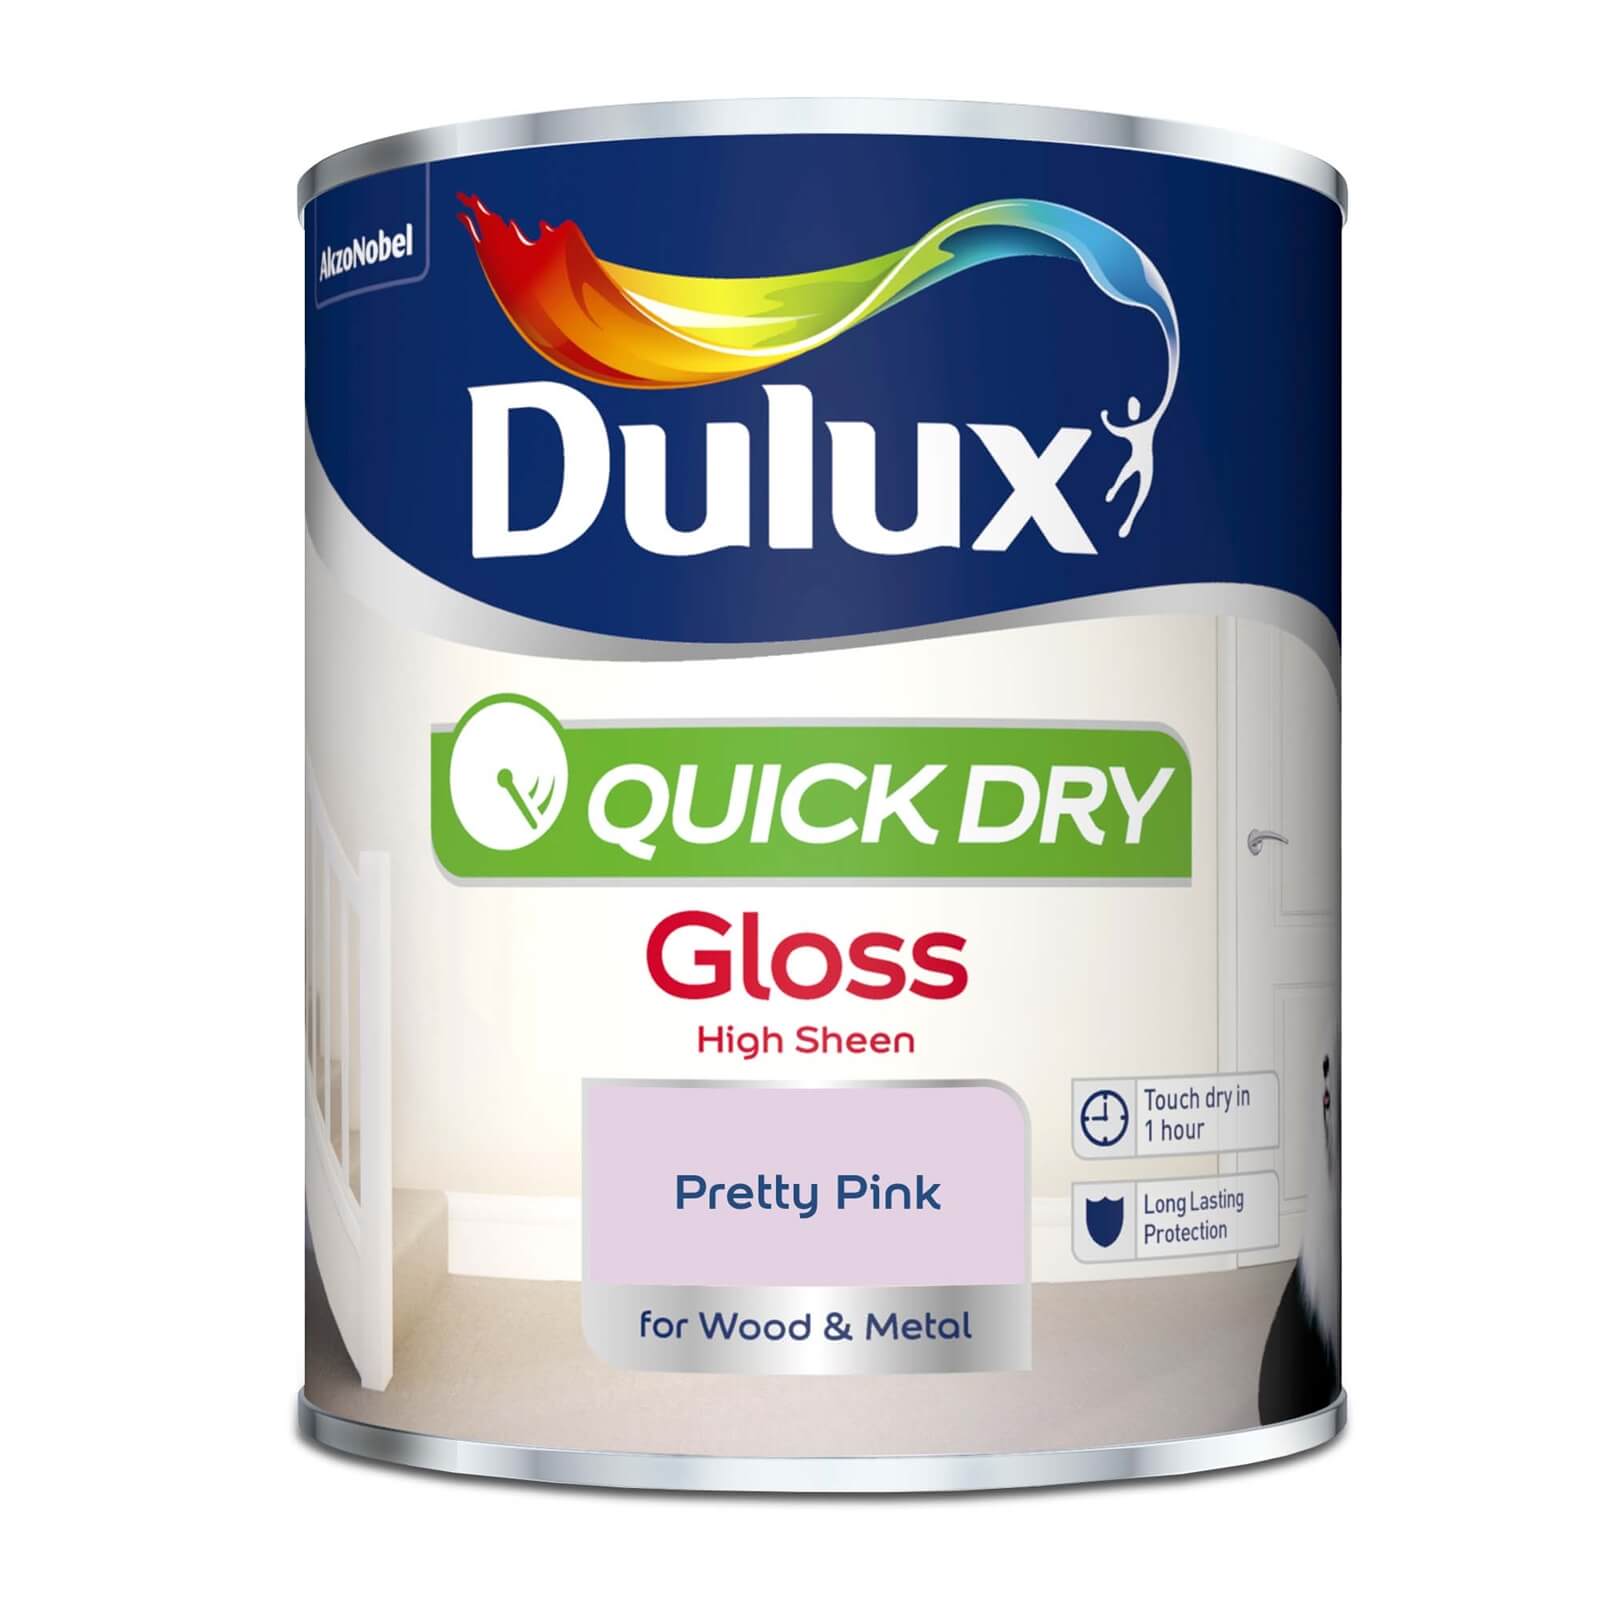 Dulux Quick Dry Gloss Paint Pretty Pink - 750ml